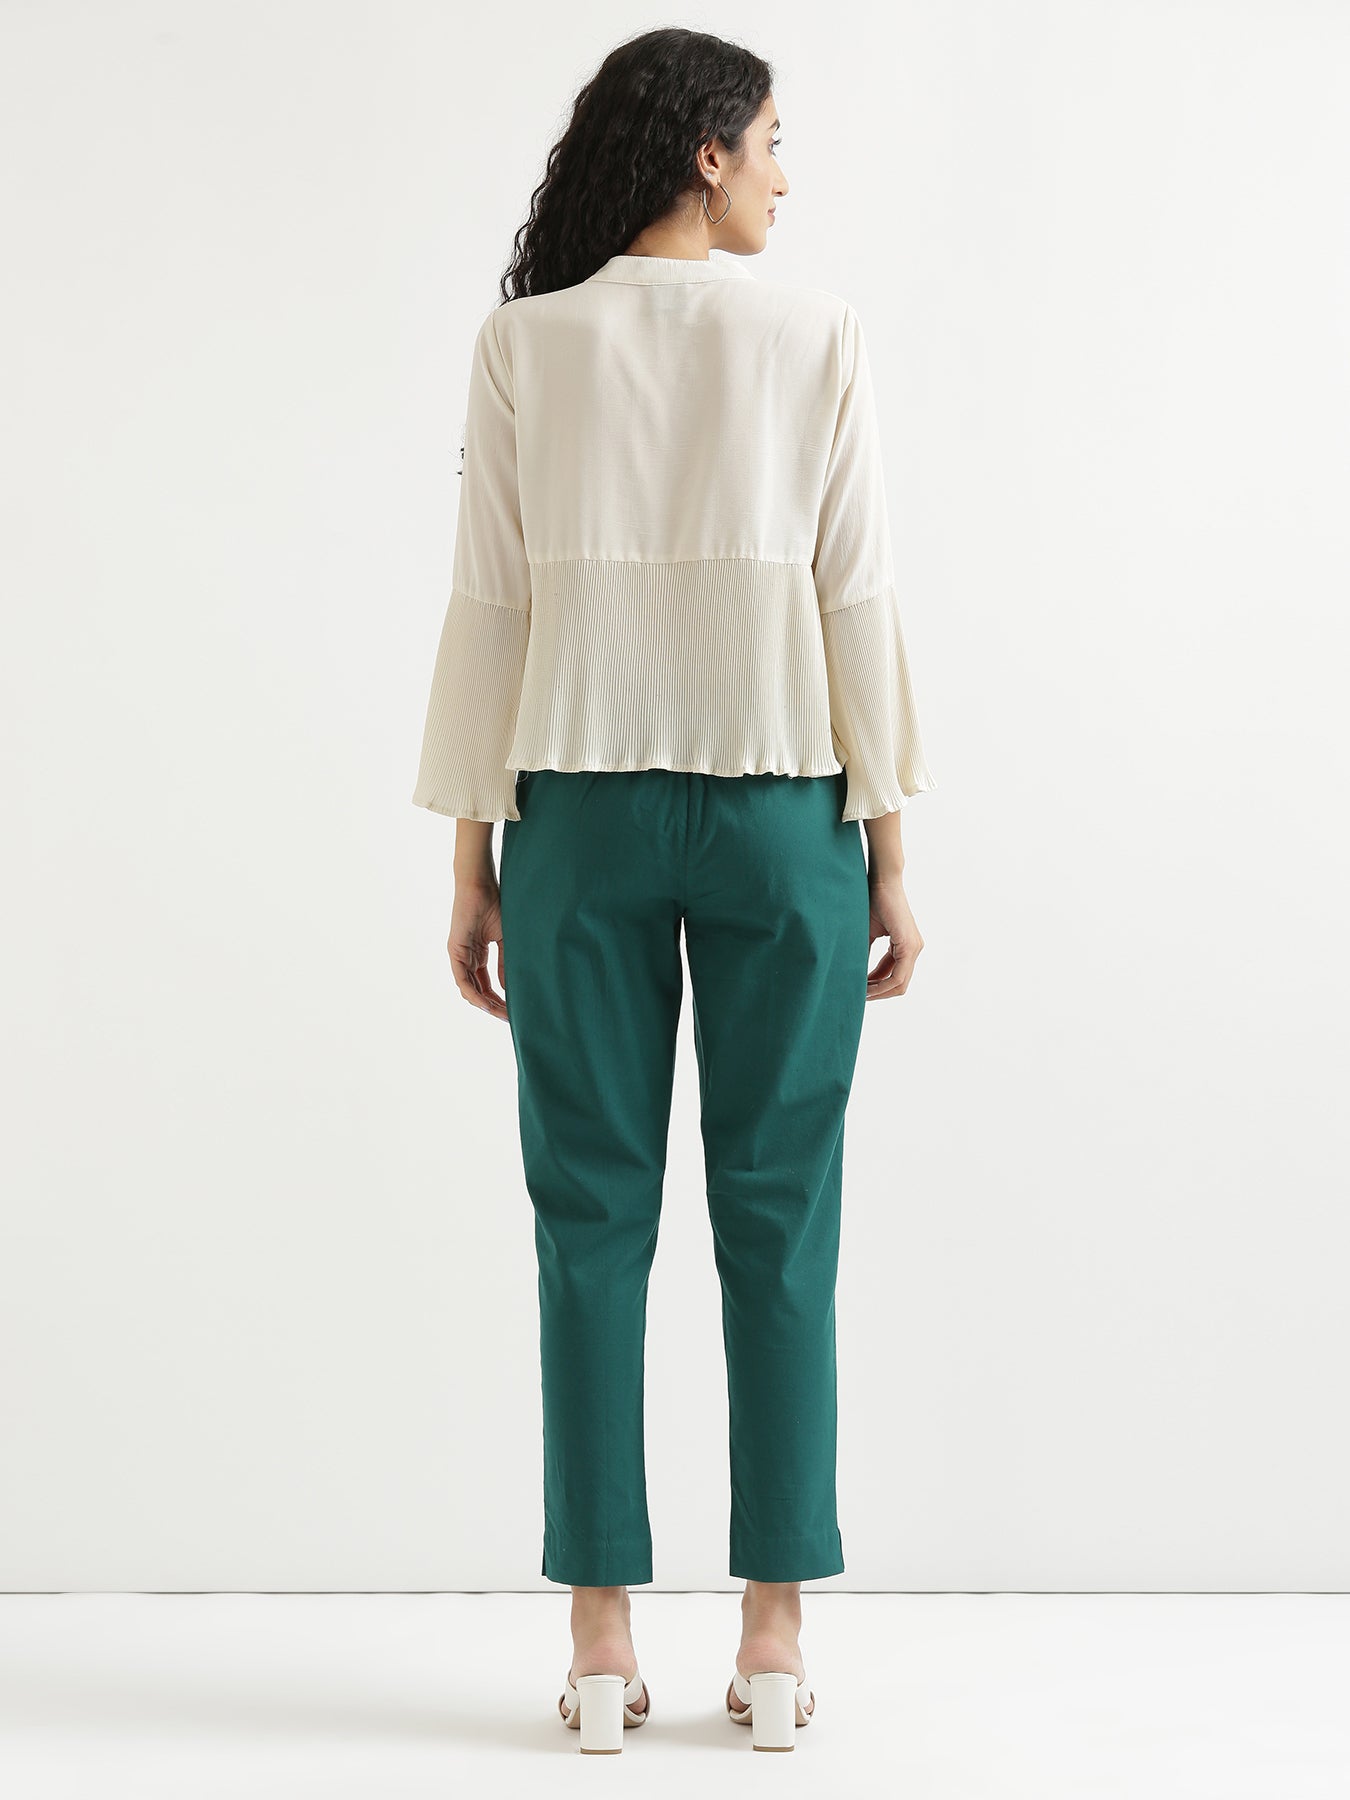 Buy Bottle Green Ankle Pant Cotton Silk for Best Price, Reviews, Free  Shipping